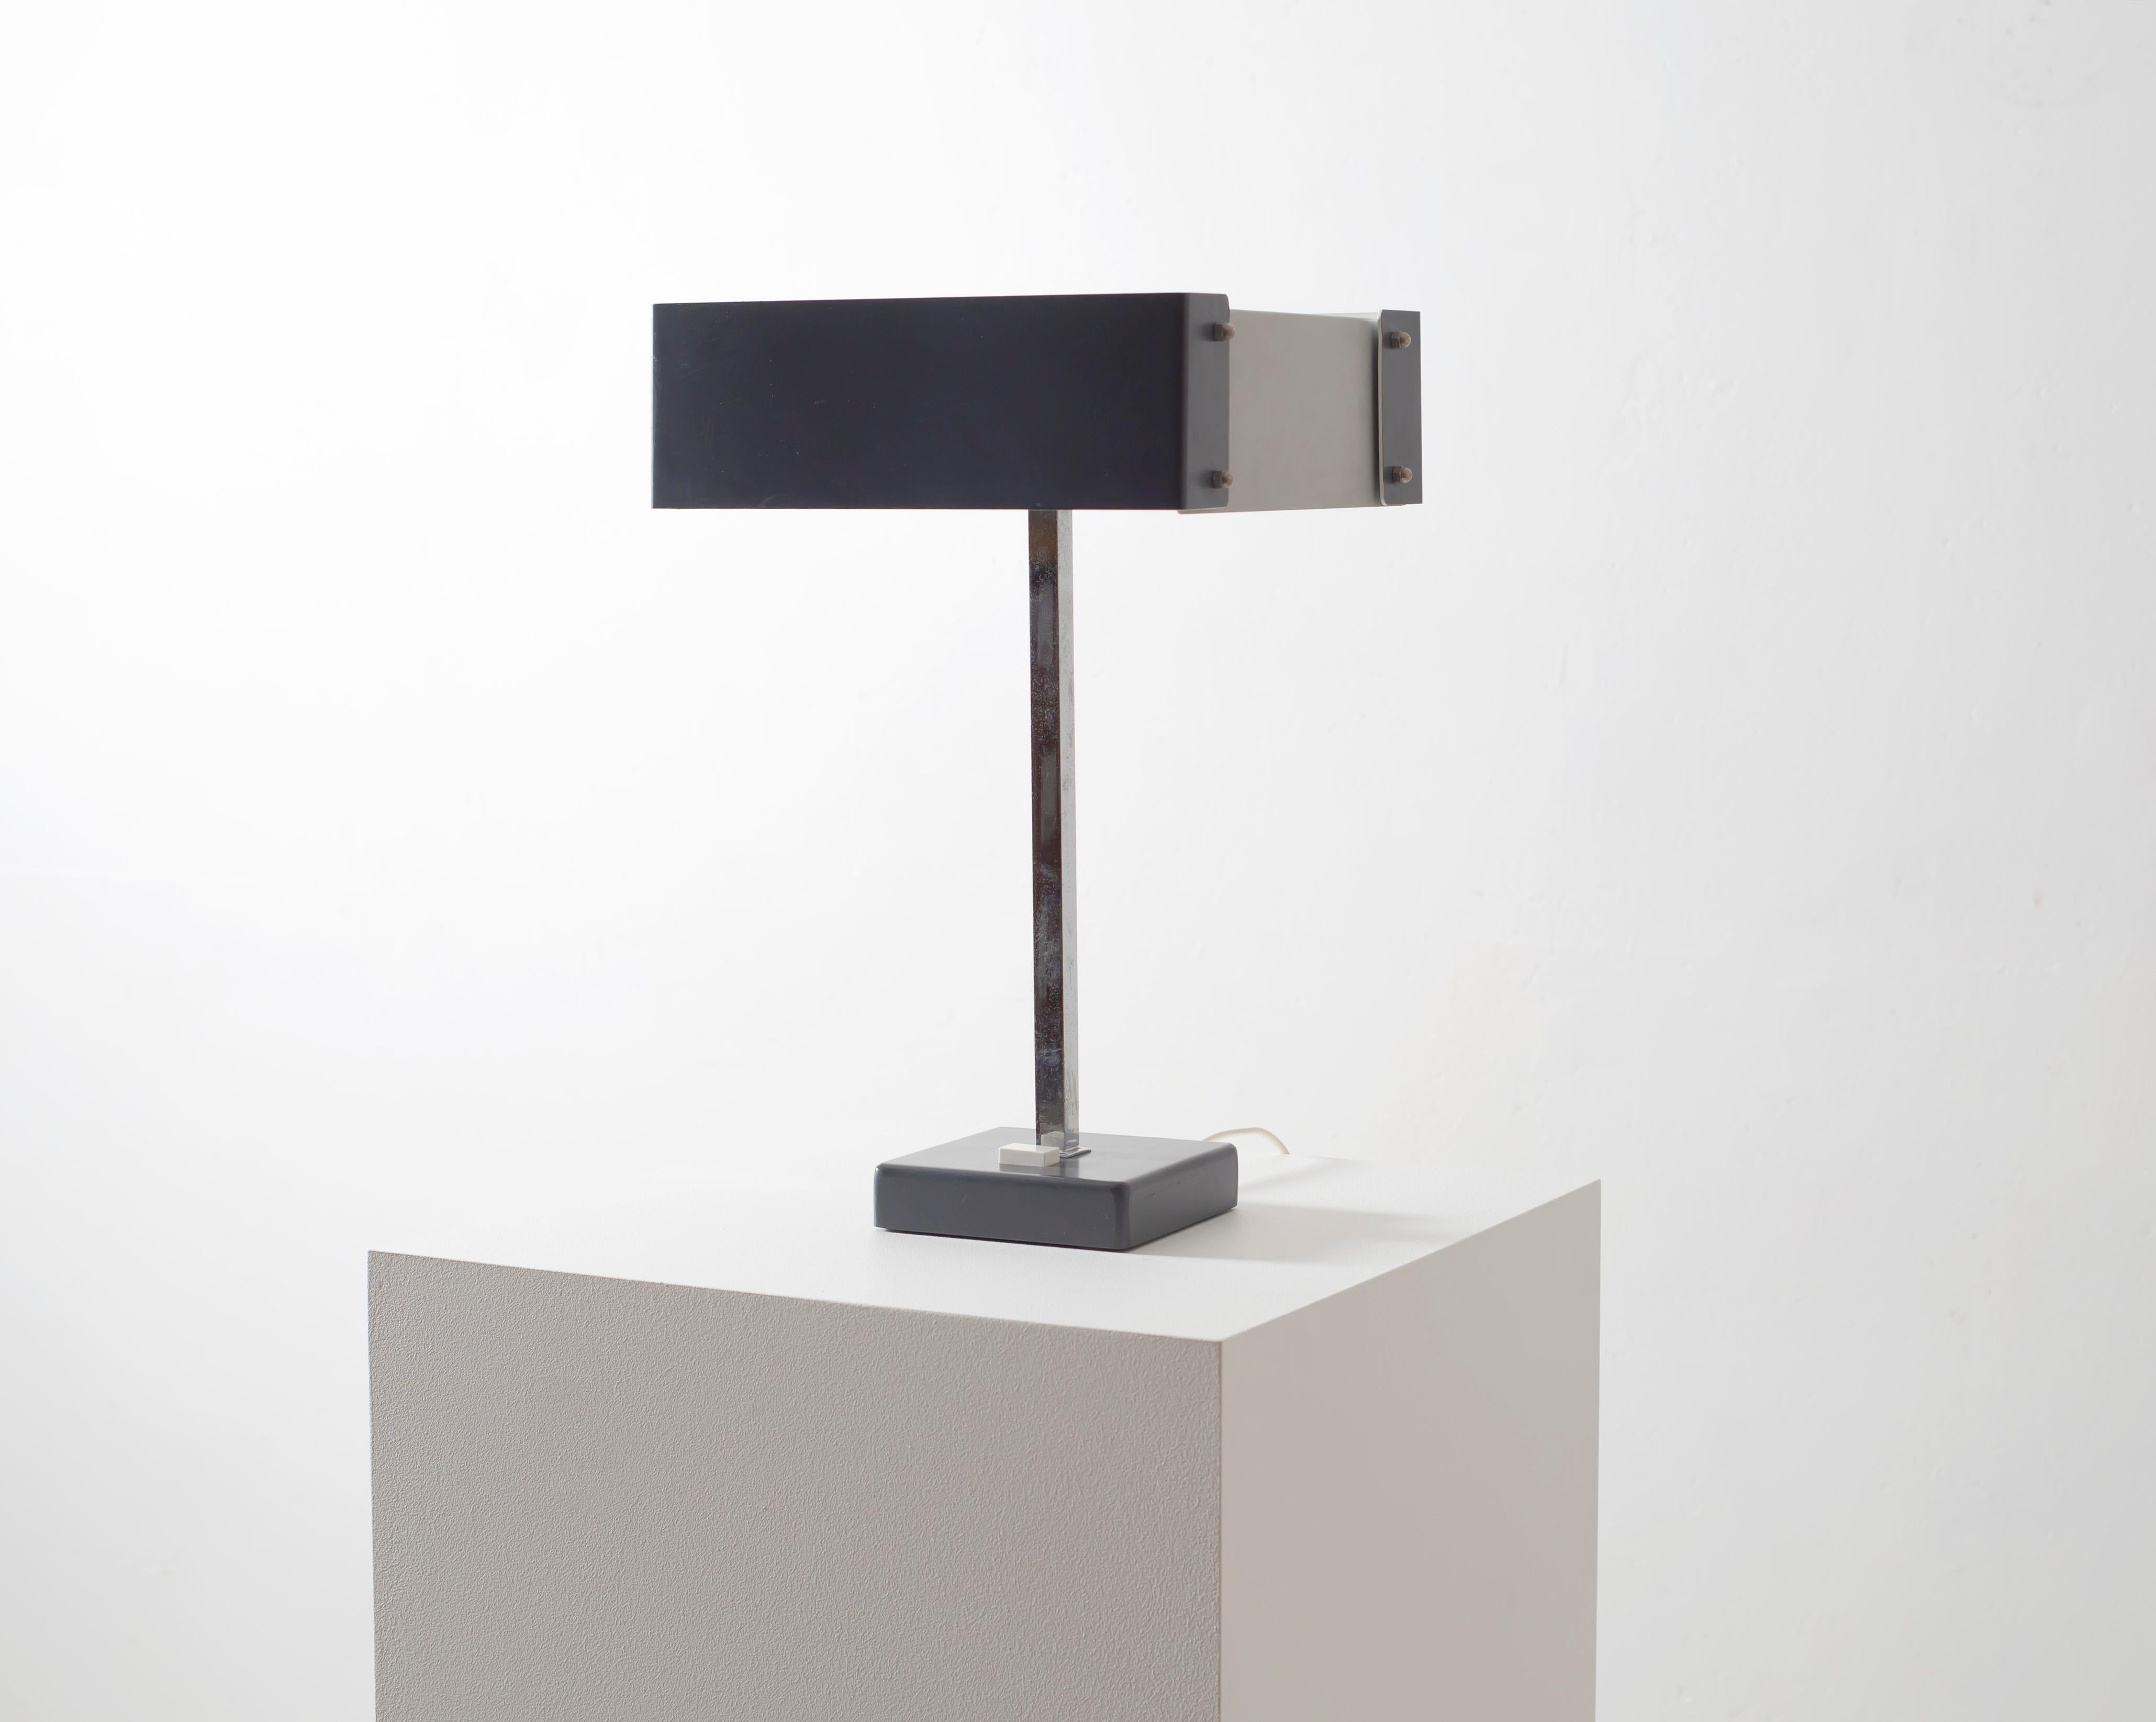 Wonderful and refreshing table lamp in steel. Few models produced by Sønnico, and the lamp won the 1969 national design award in Norway, “Merket for God Design”. The lamp is fully working and in very good condition.